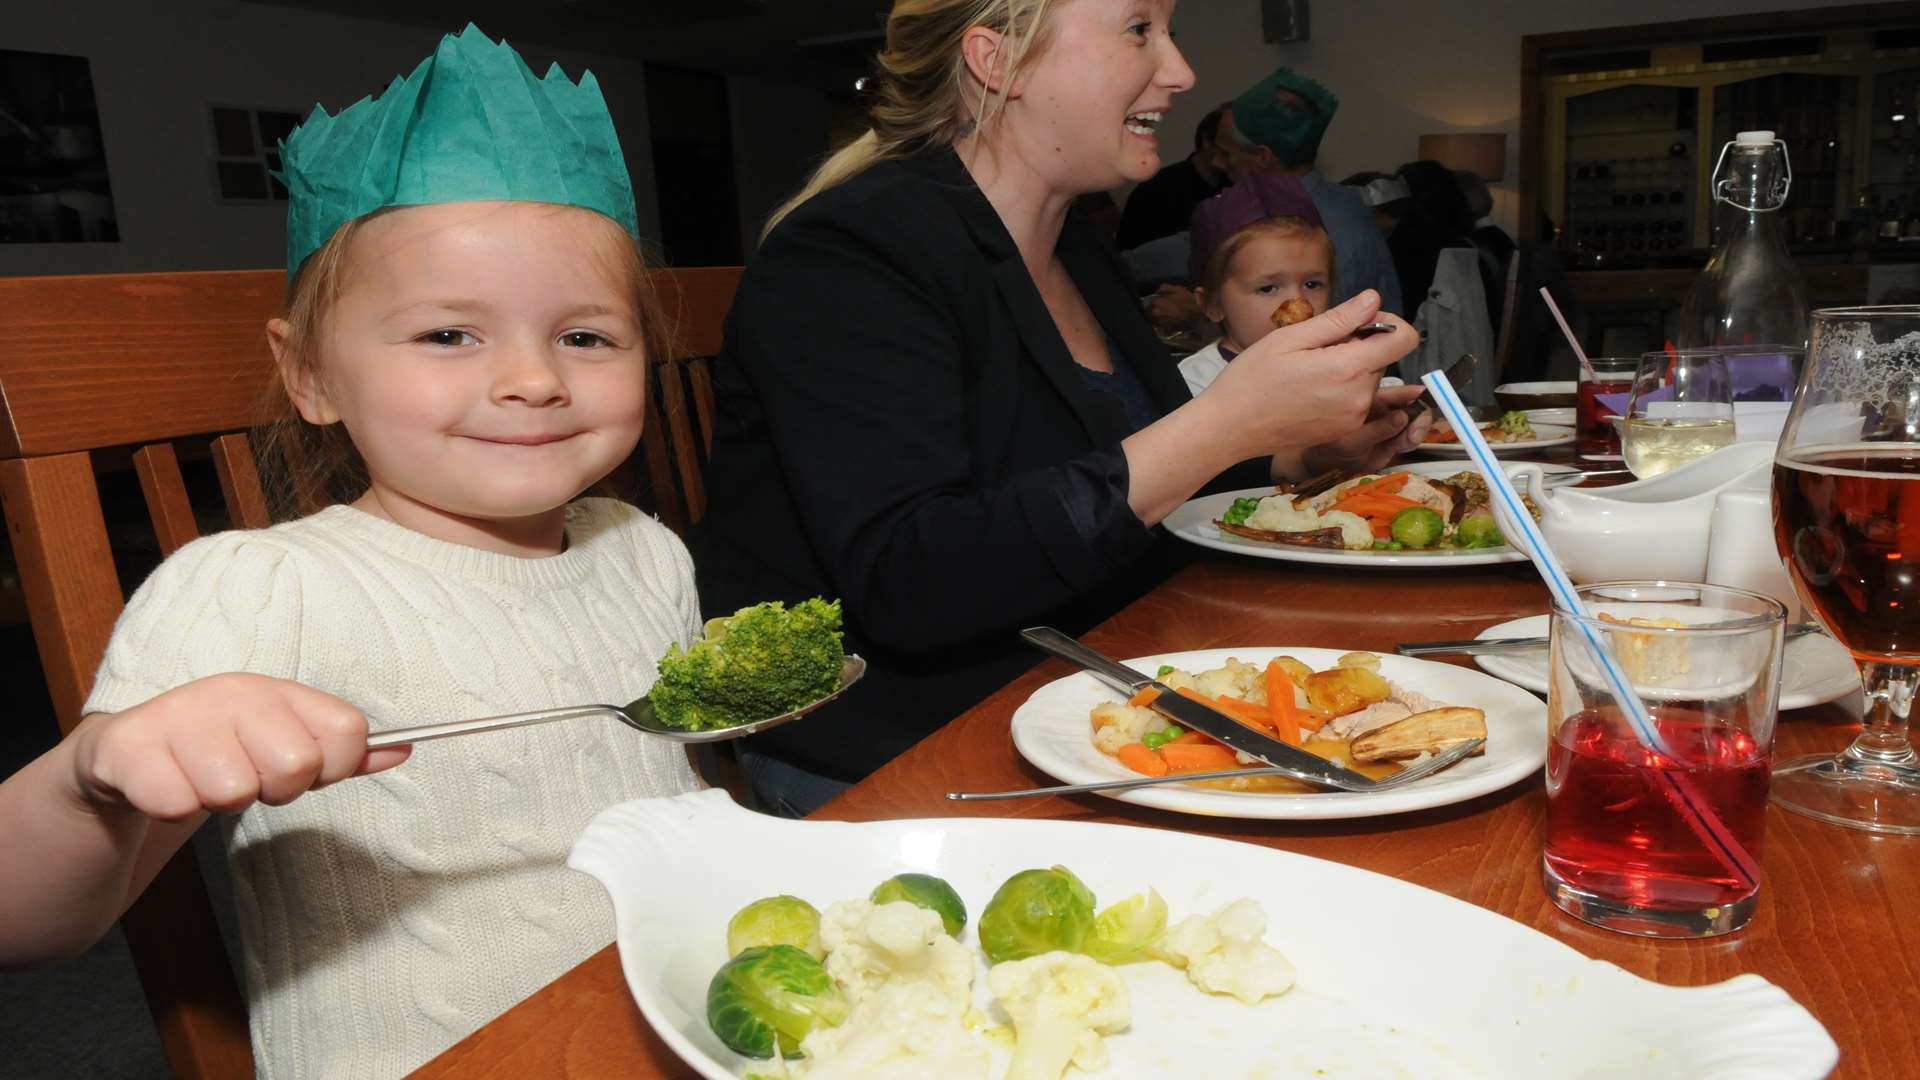 The KM staged a Christmas meal for flood victims that were hit by flood water over the Christmas period